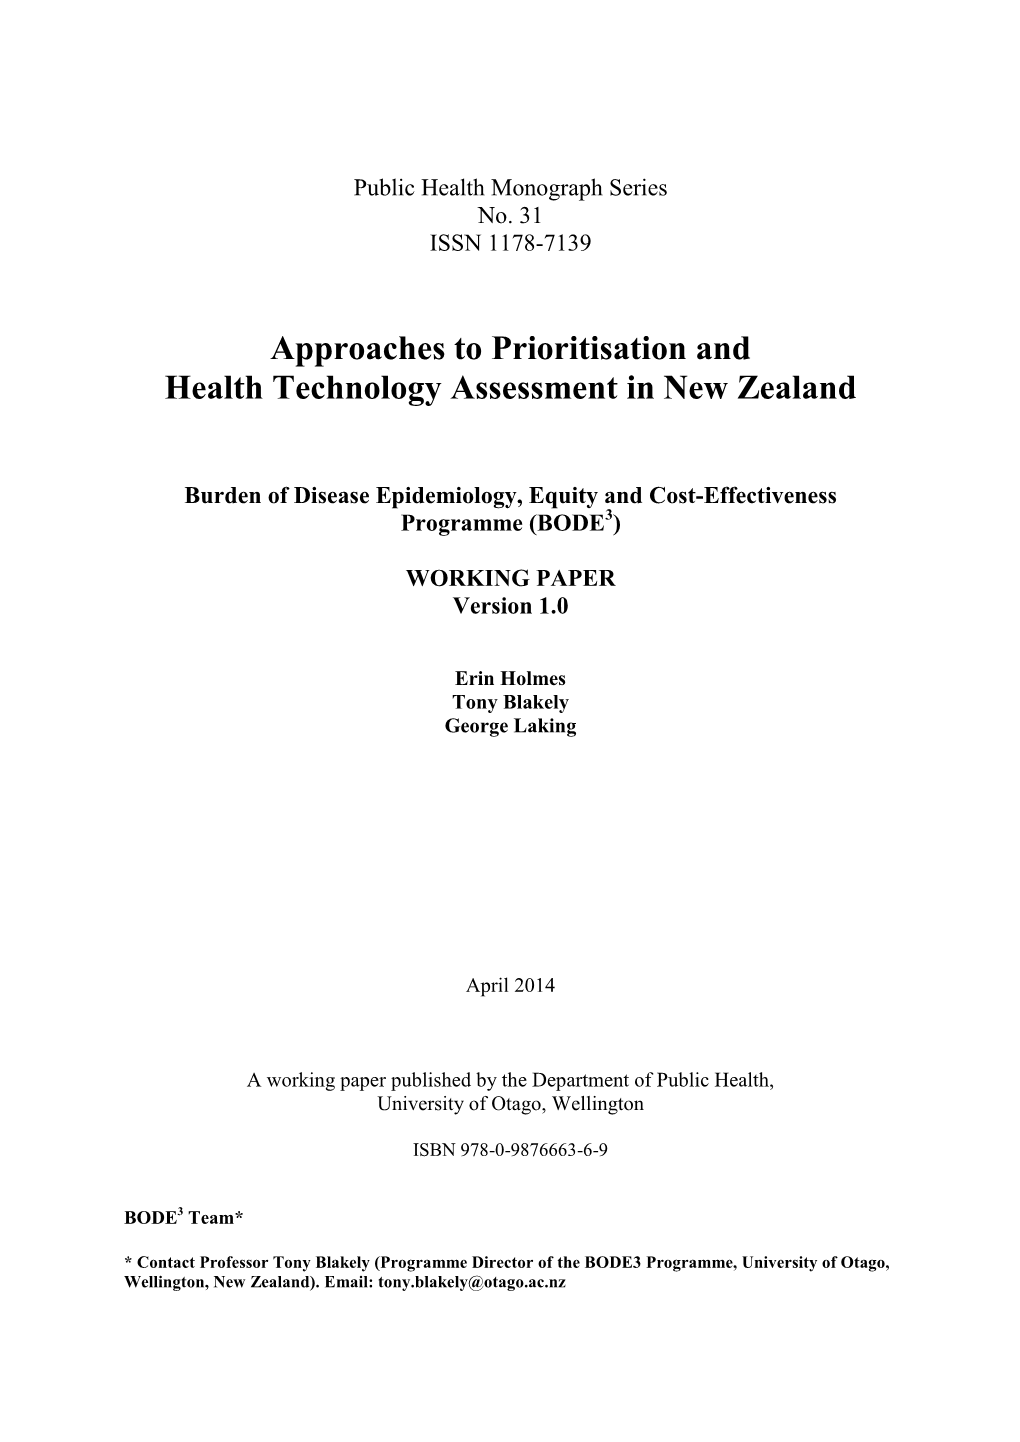 Approaches to Prioritisation and Health Technology Assessment in New Zealand